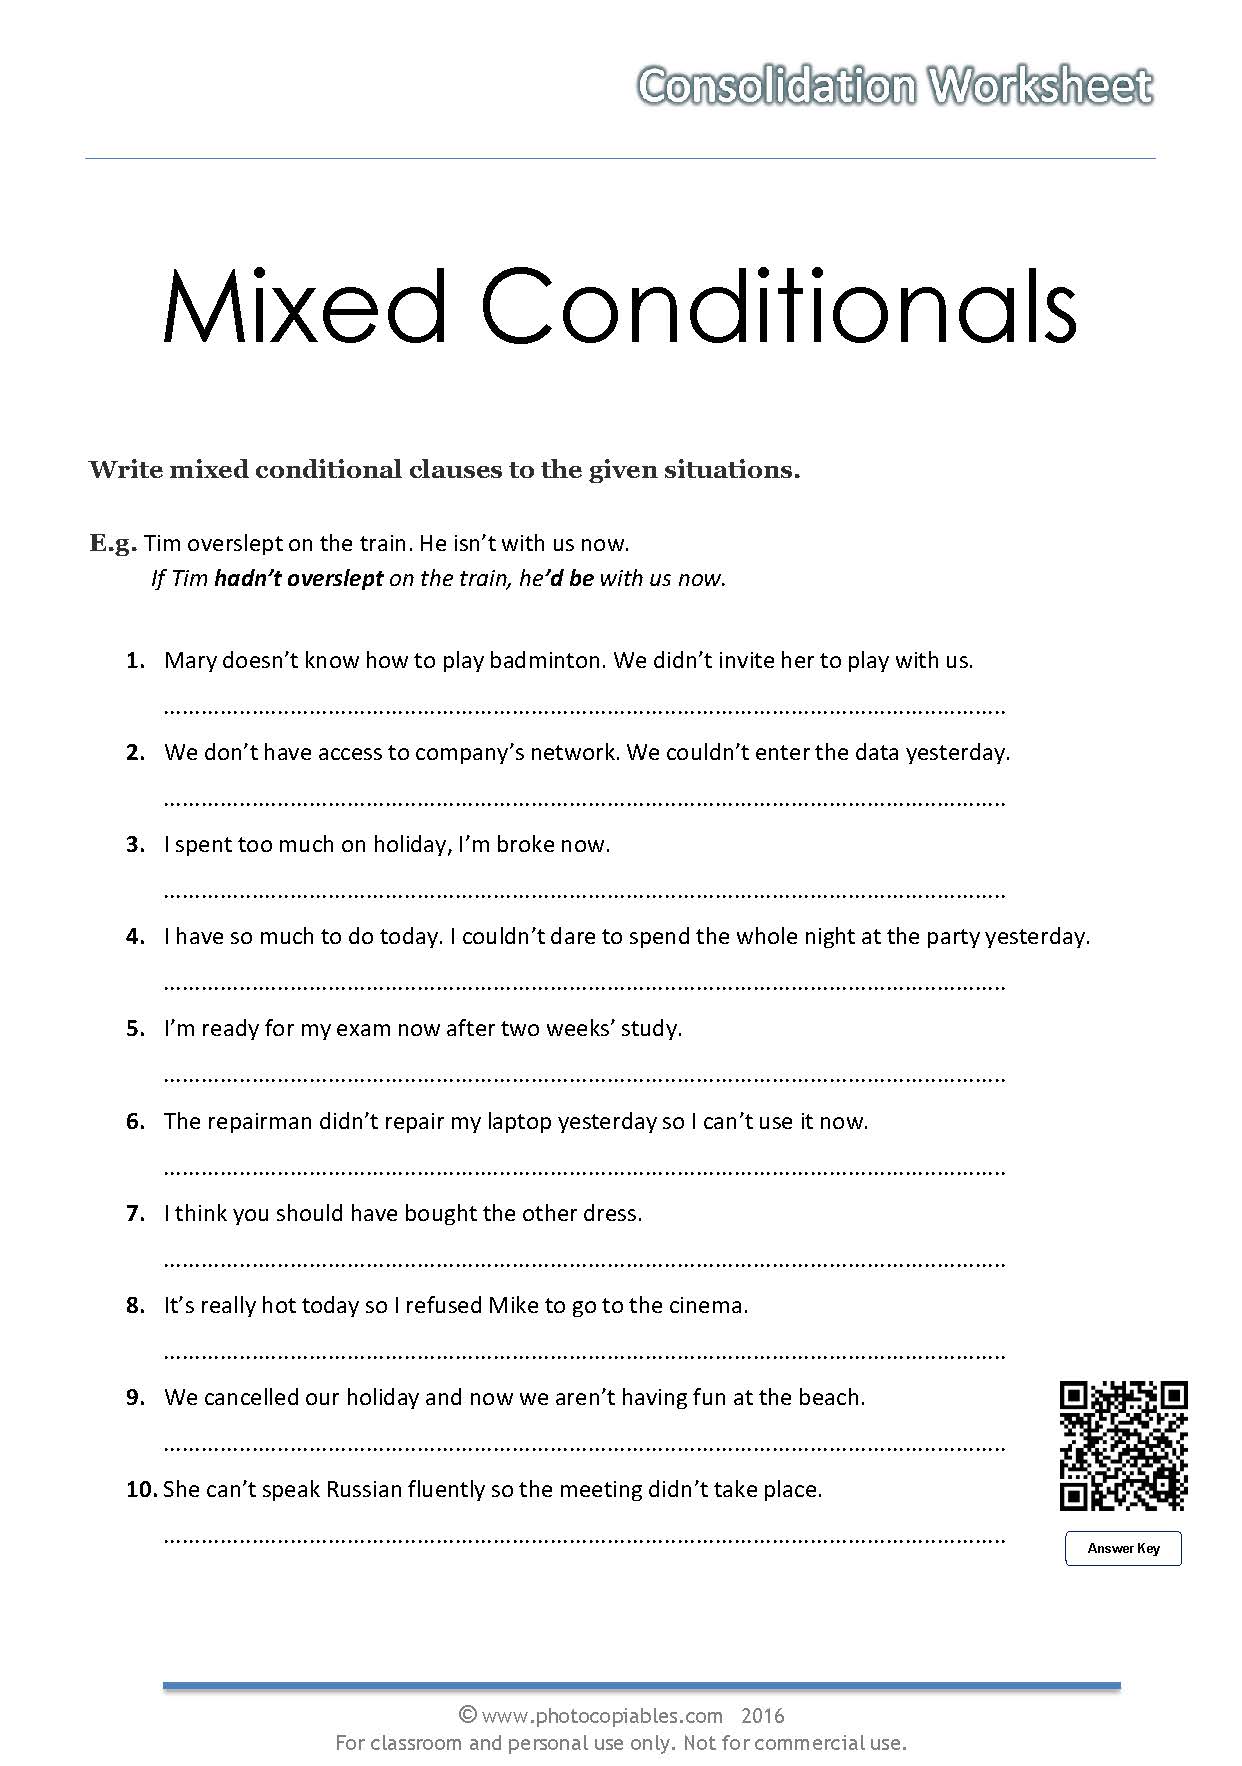 conditionals exercises pdf with answers In Conditional Statements Worksheet With Answers